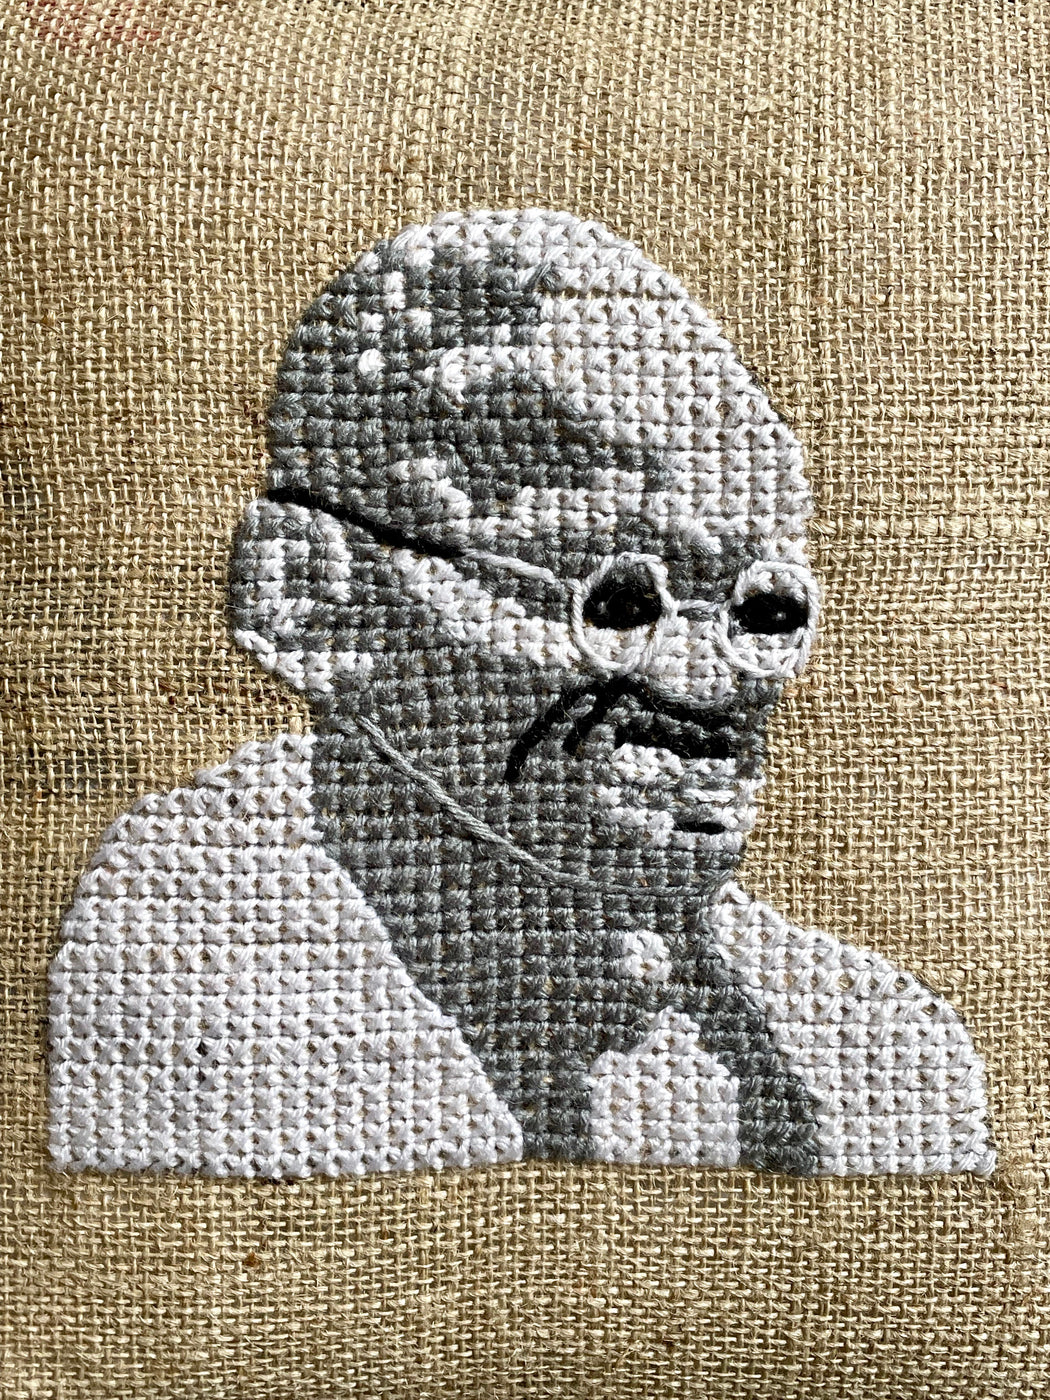 "Gandhi" Hand-Embroidered Pillow